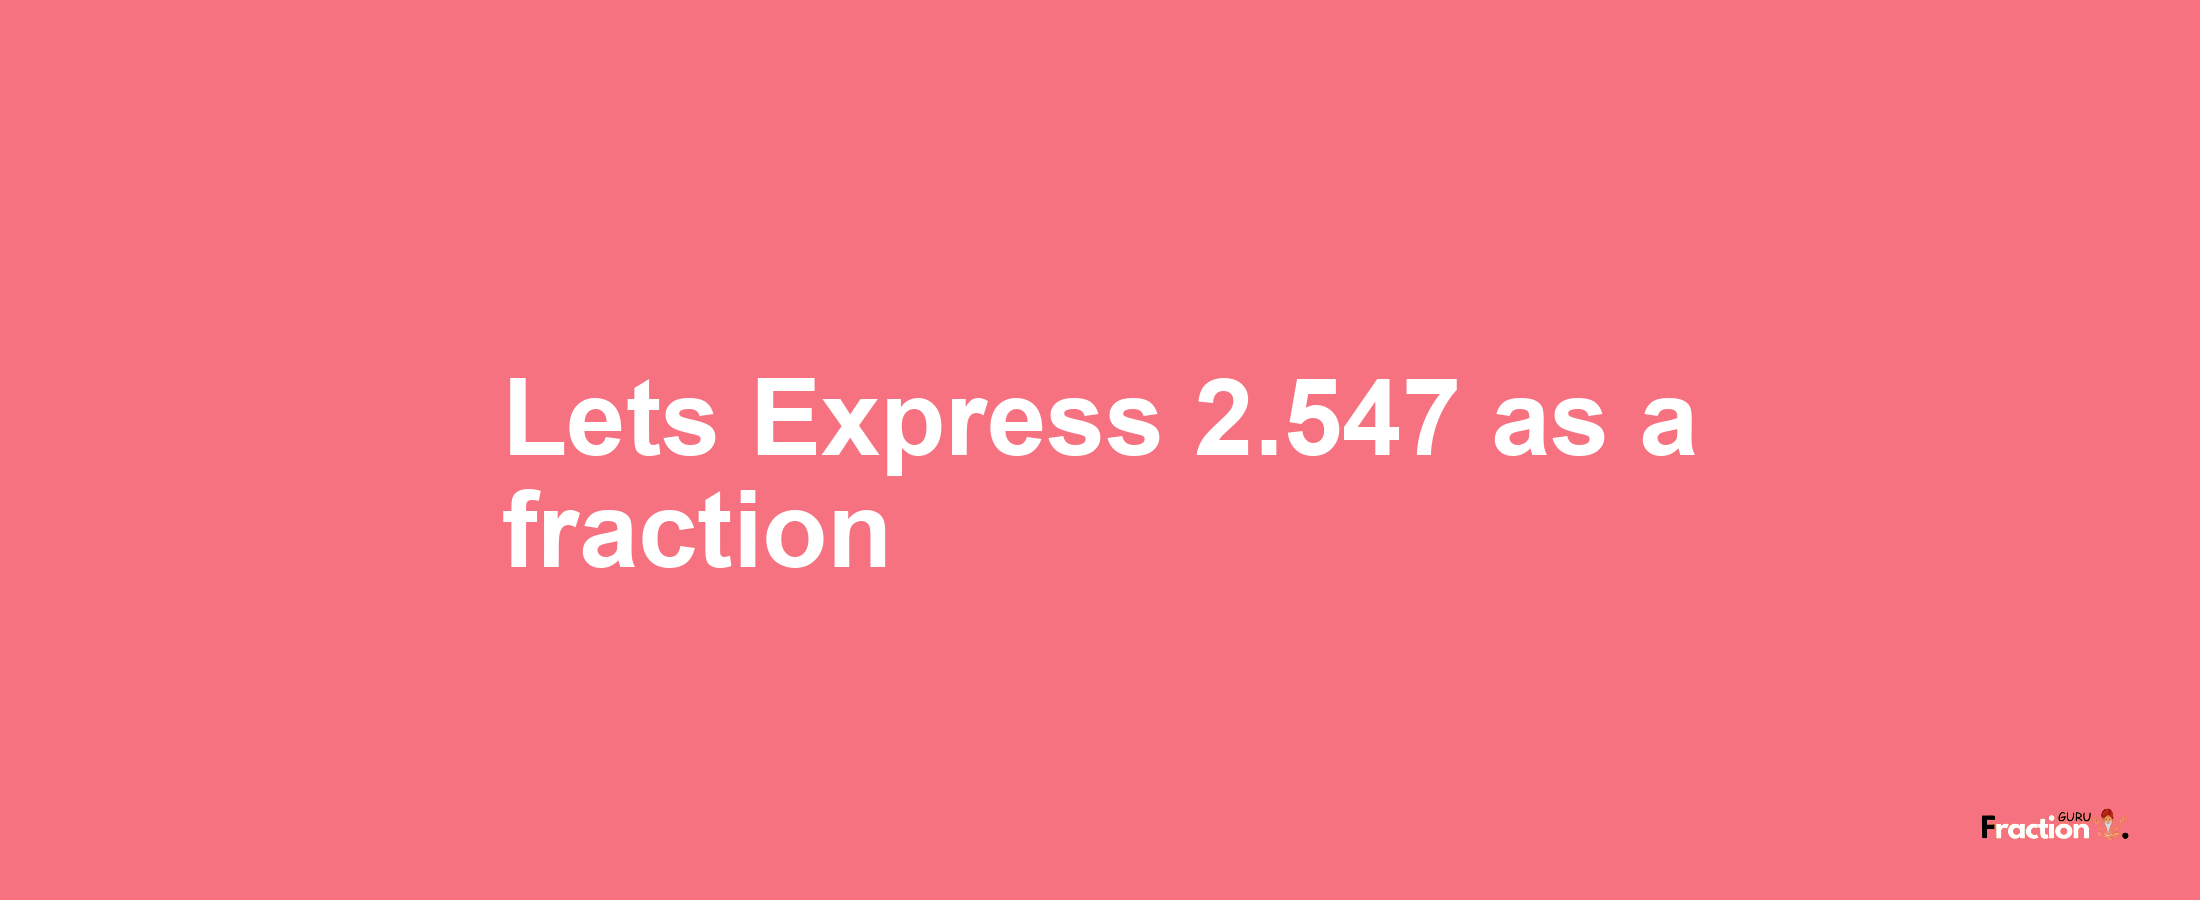 Lets Express 2.547 as afraction